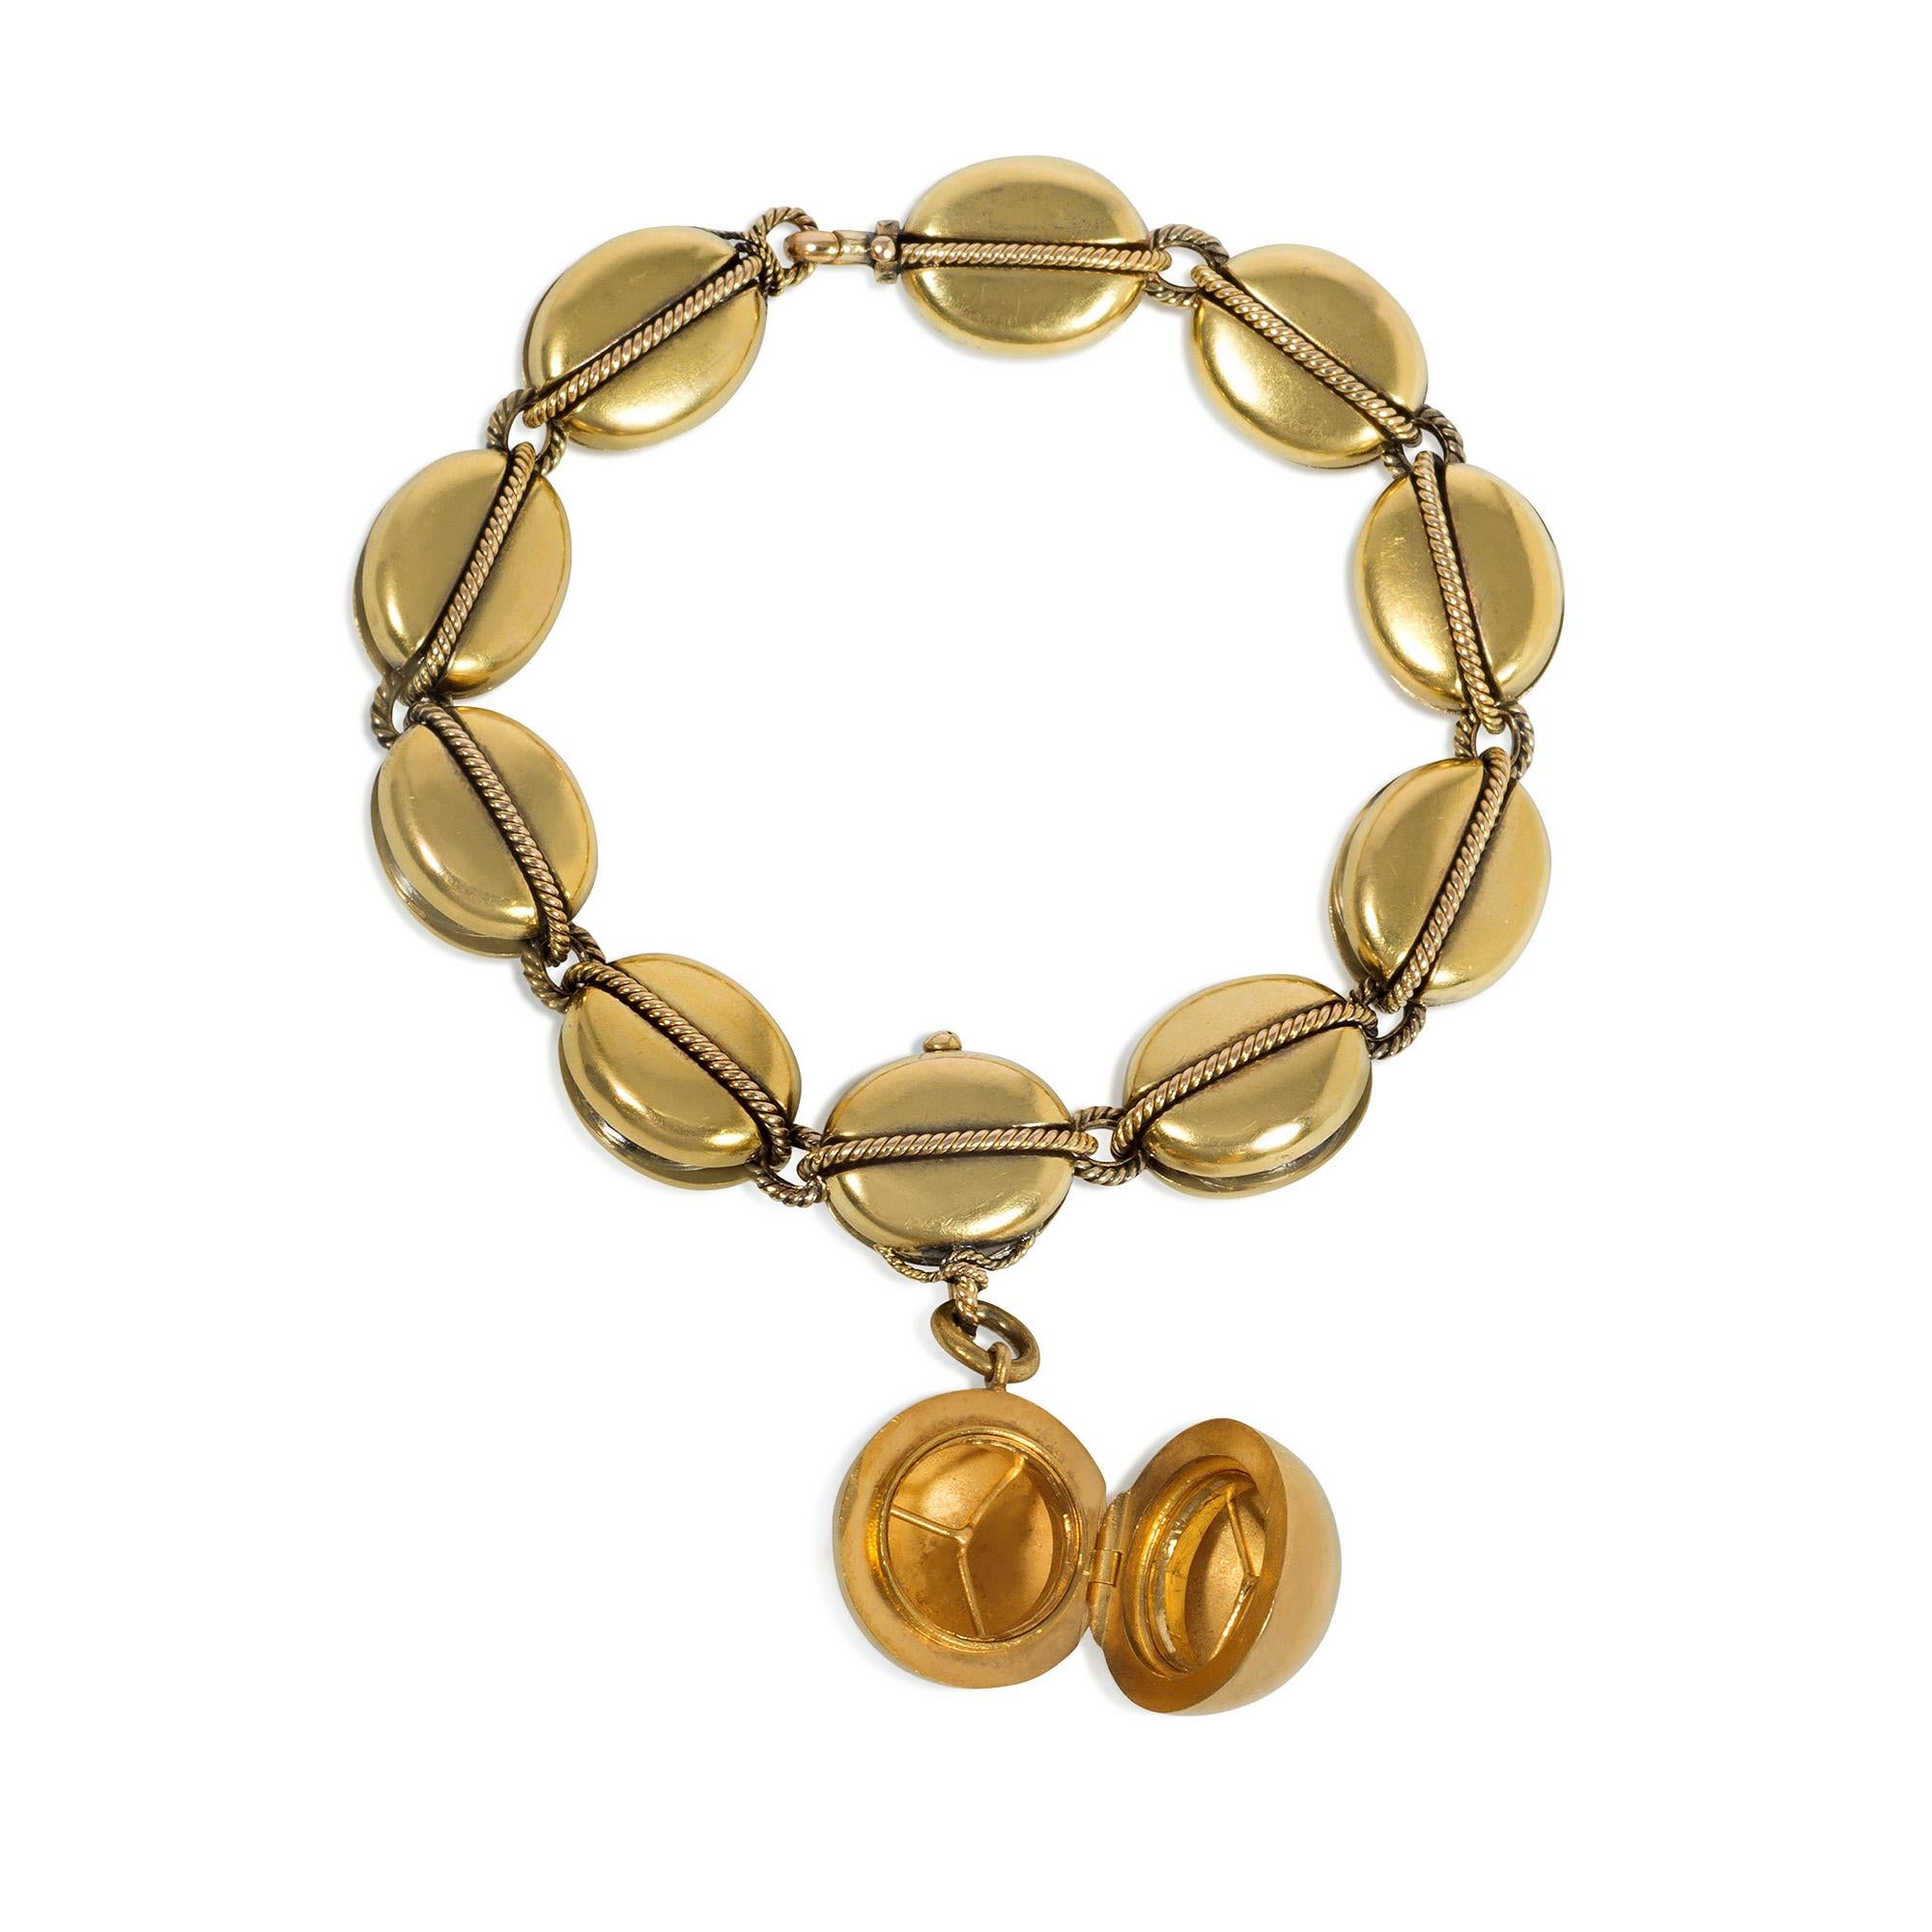 A Victorian gold bracelet designed as nautical pulley links and culminating in a ball pendant charm with a concealed locket, in 15k. Hunt and Roskell, England

Dimensions: 6.75